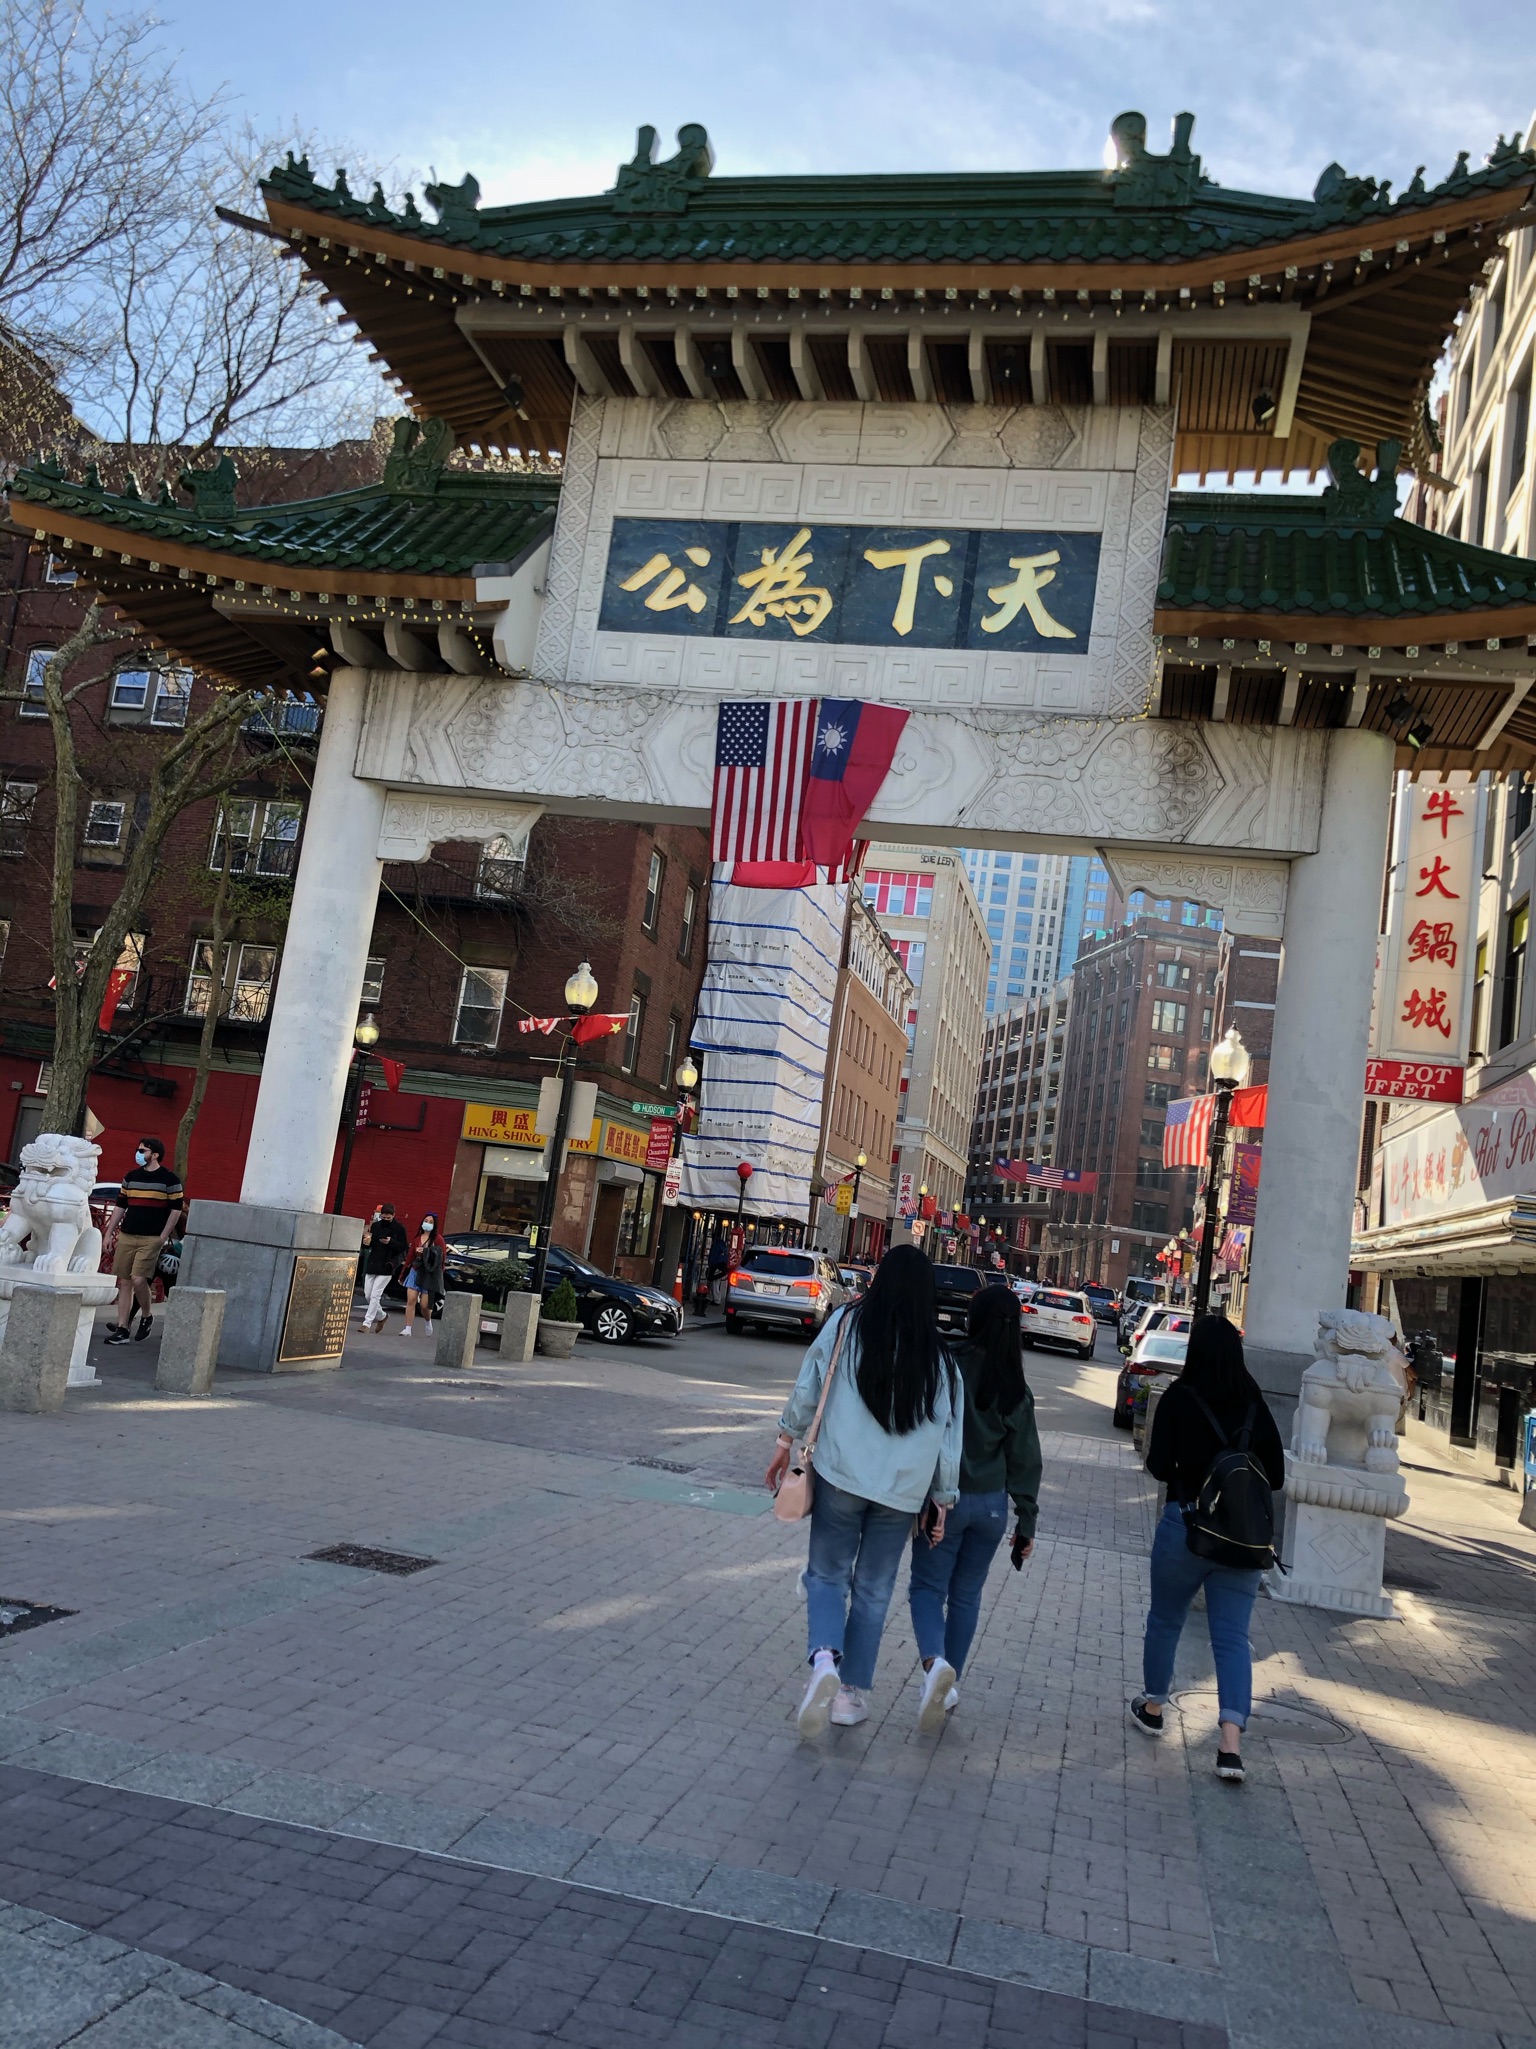 We walk through Chinatown to say goodbye to a friend.